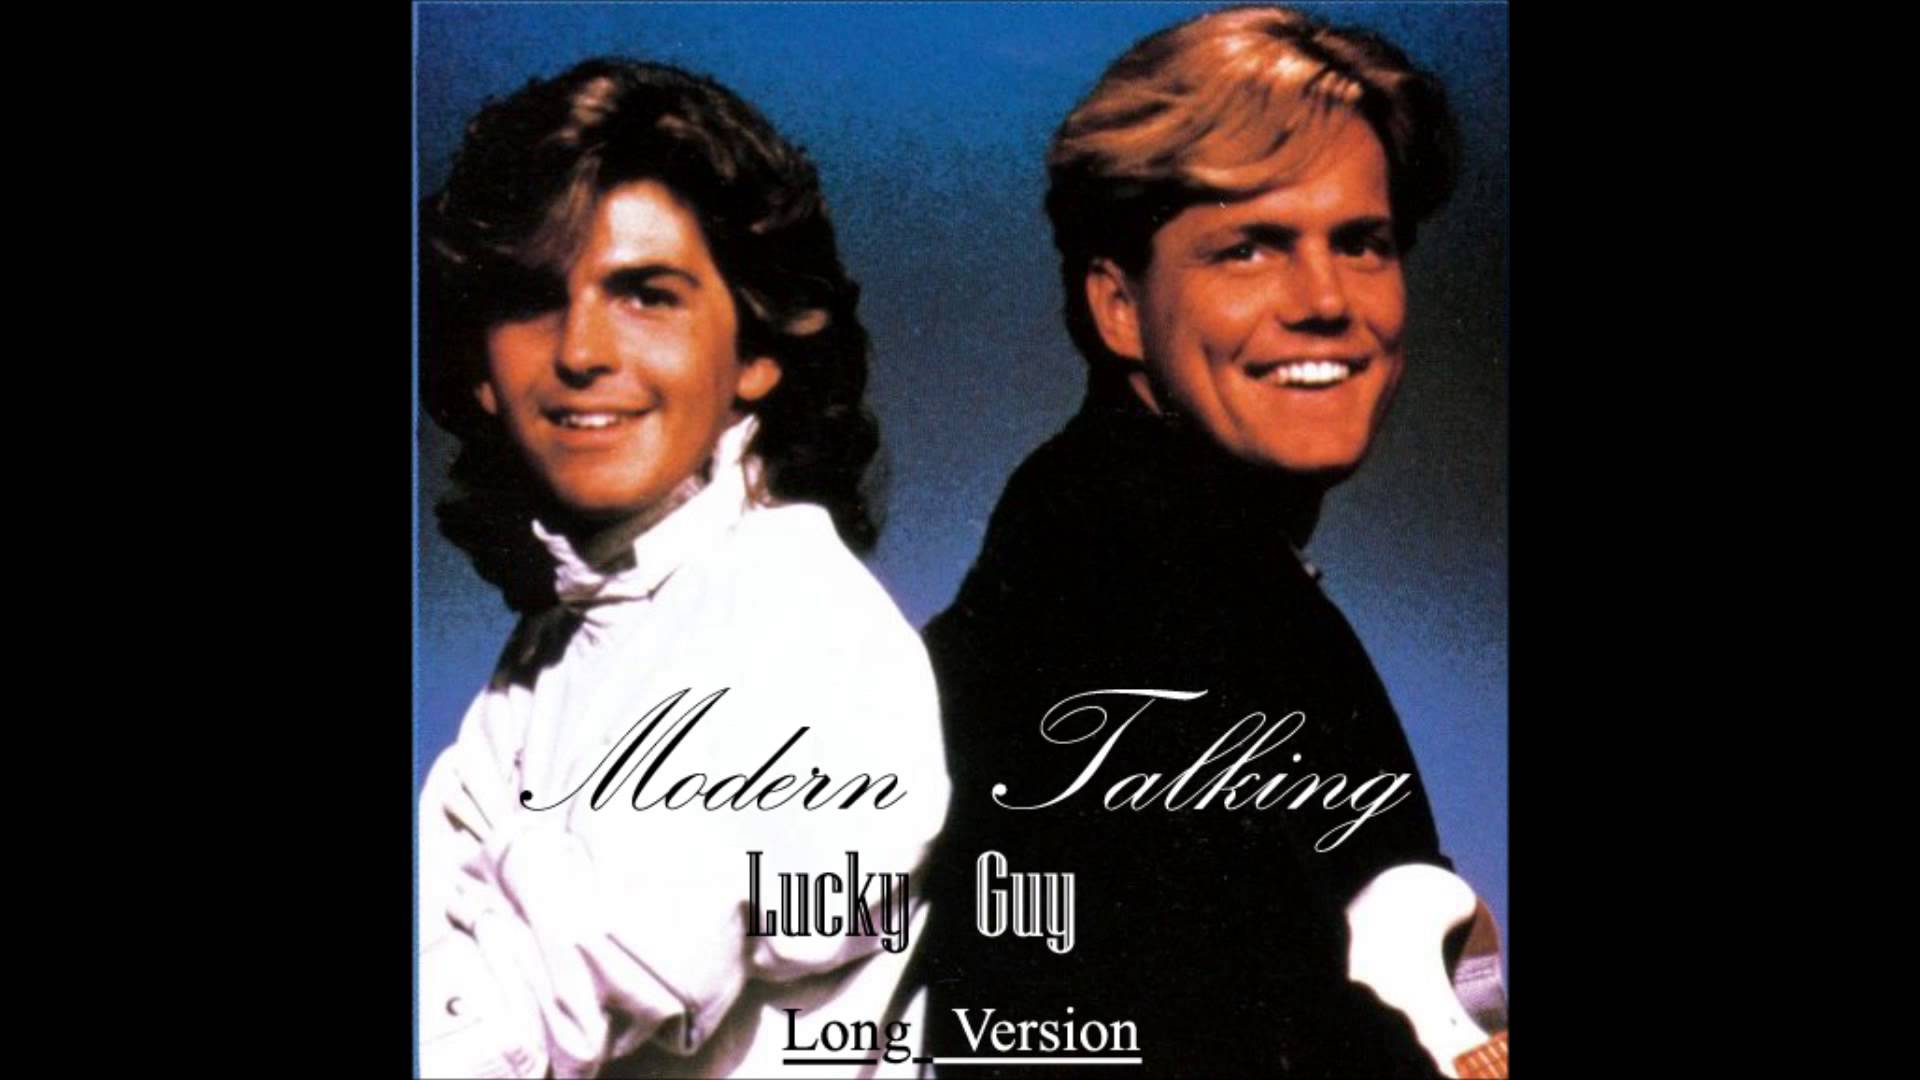 Modern Talking - Lucky Guy long version mixed by Manaev - YouTube